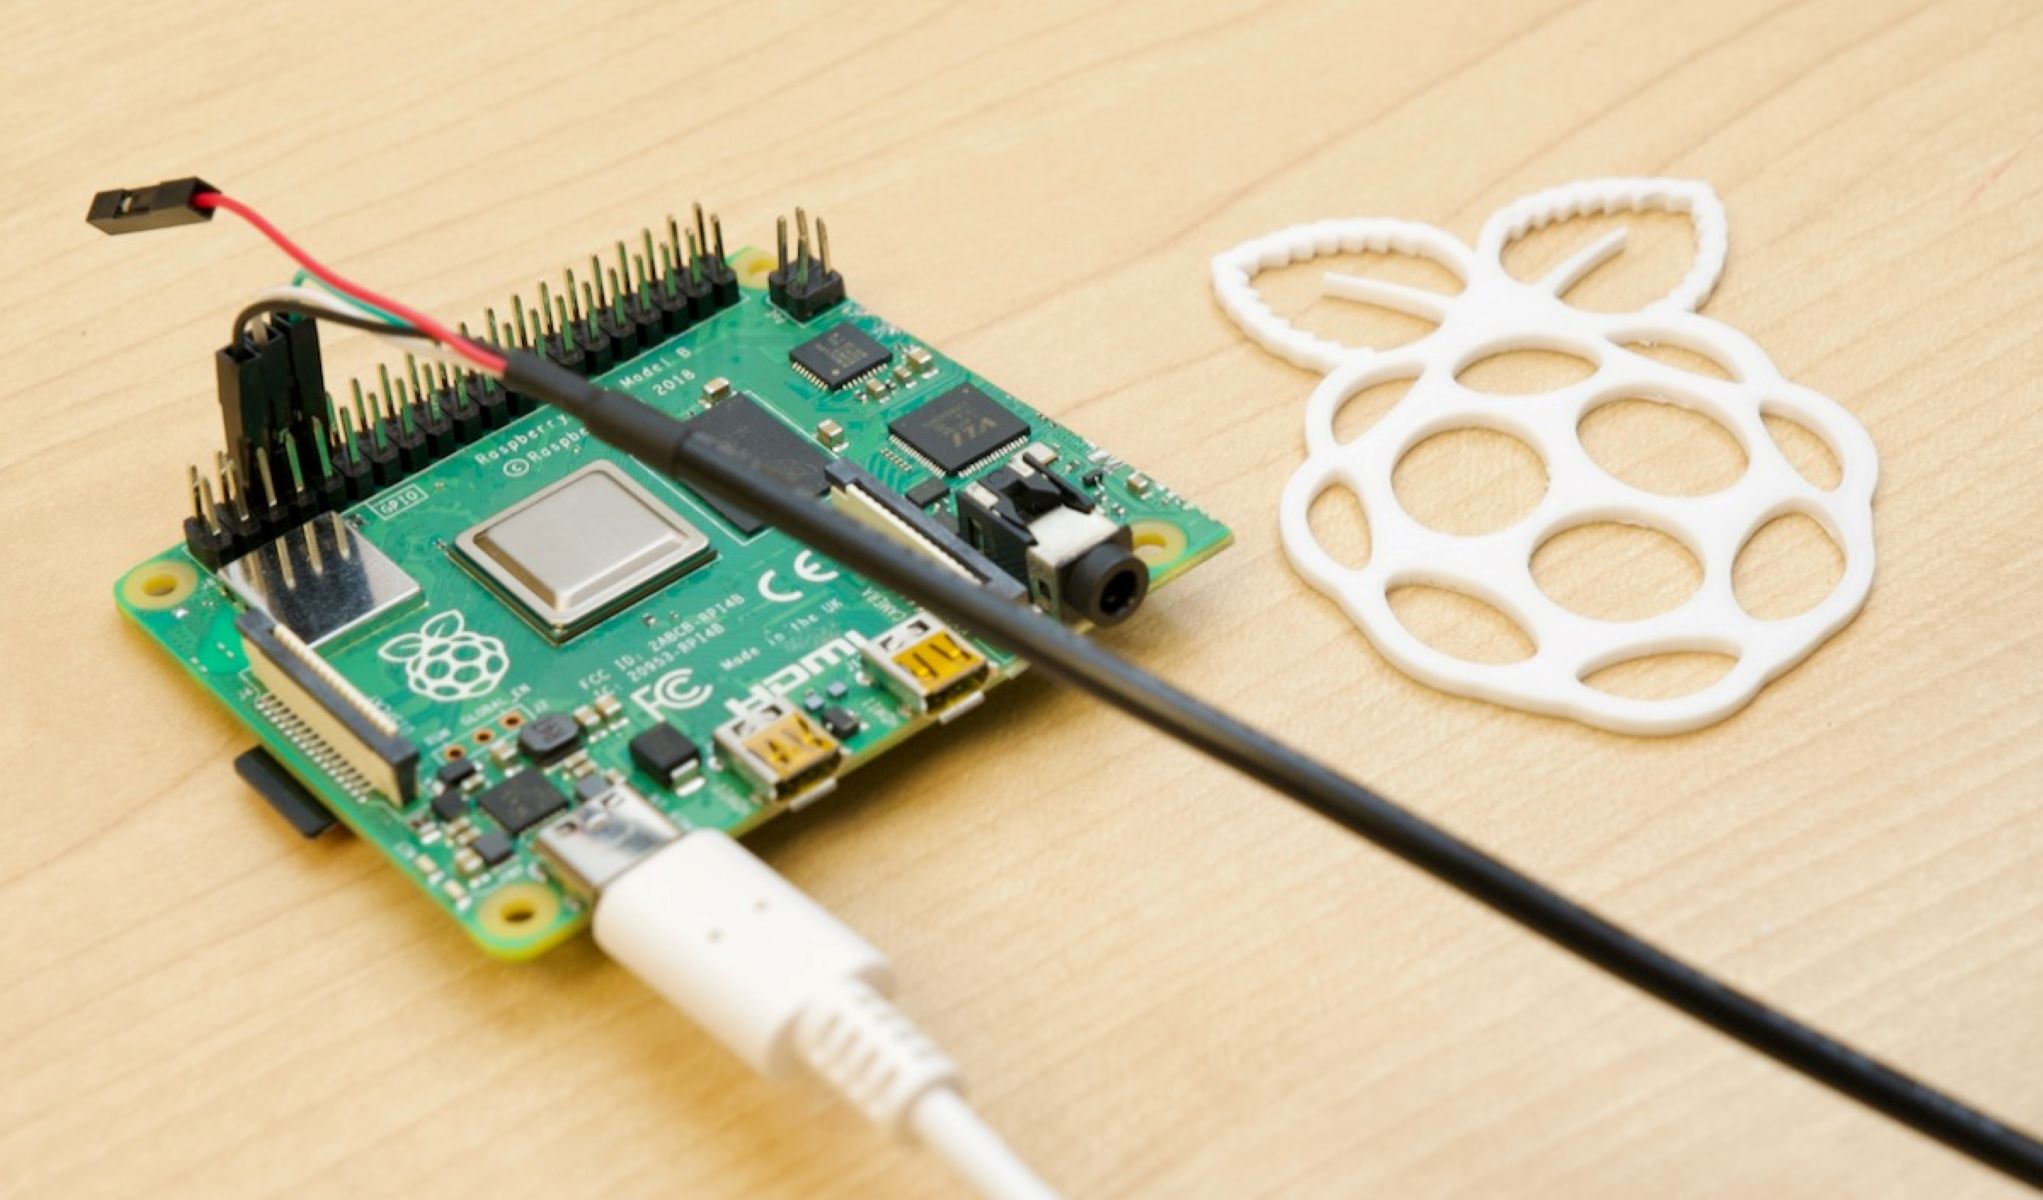 How To Check If A USB Hub Is Connected To Raspberry Pi